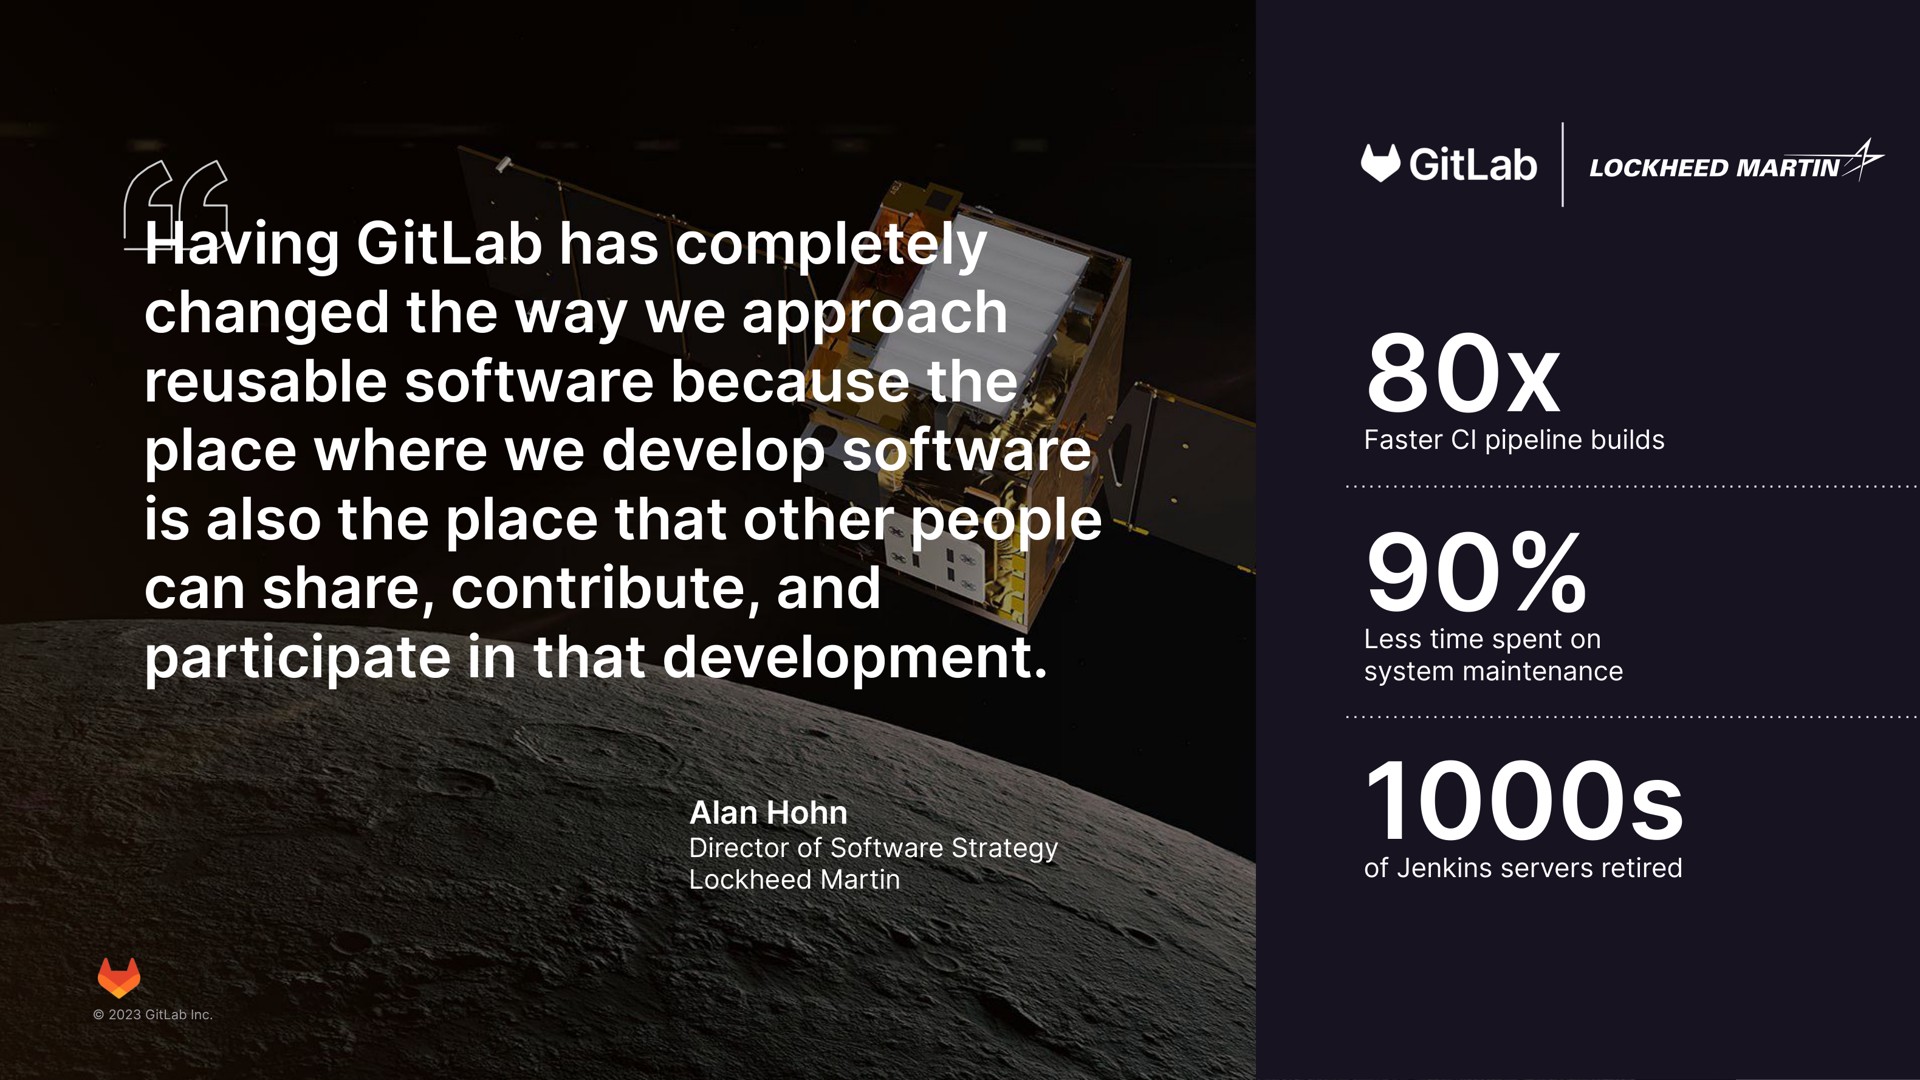 having has completely changed the way we approach because the place where we develop is also the place that other people can share contribute and participate in that development a | GitLab